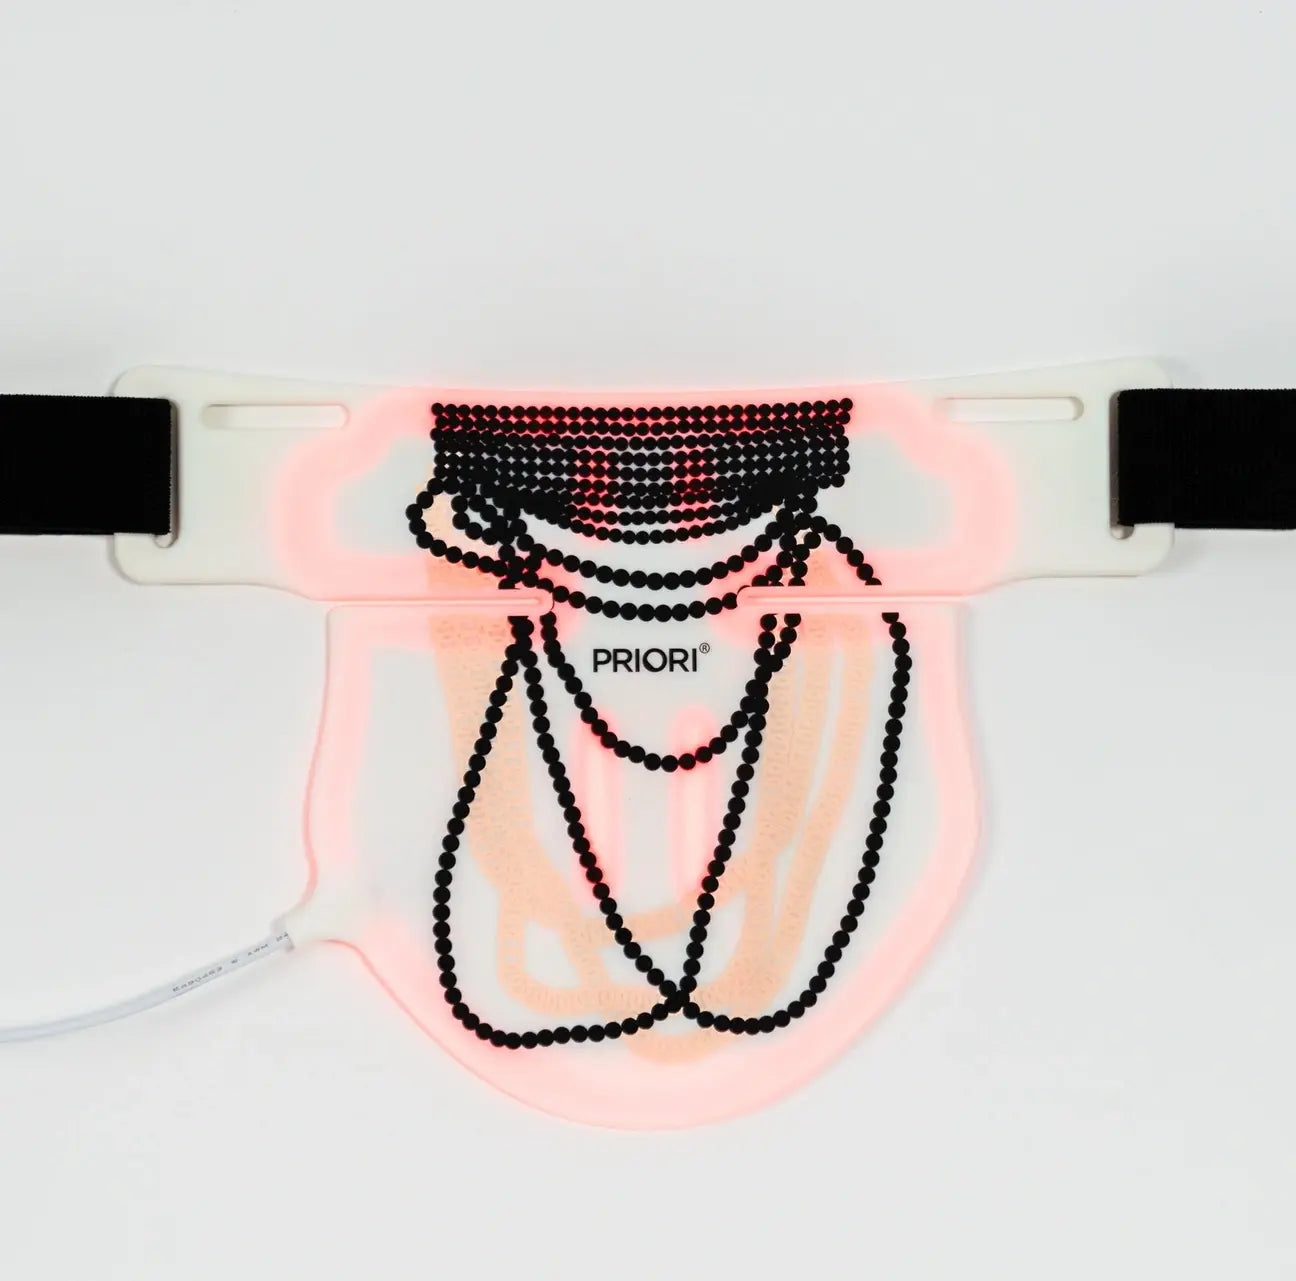 Priori UnveiLED Light Therapy Neck and Decollete Mask